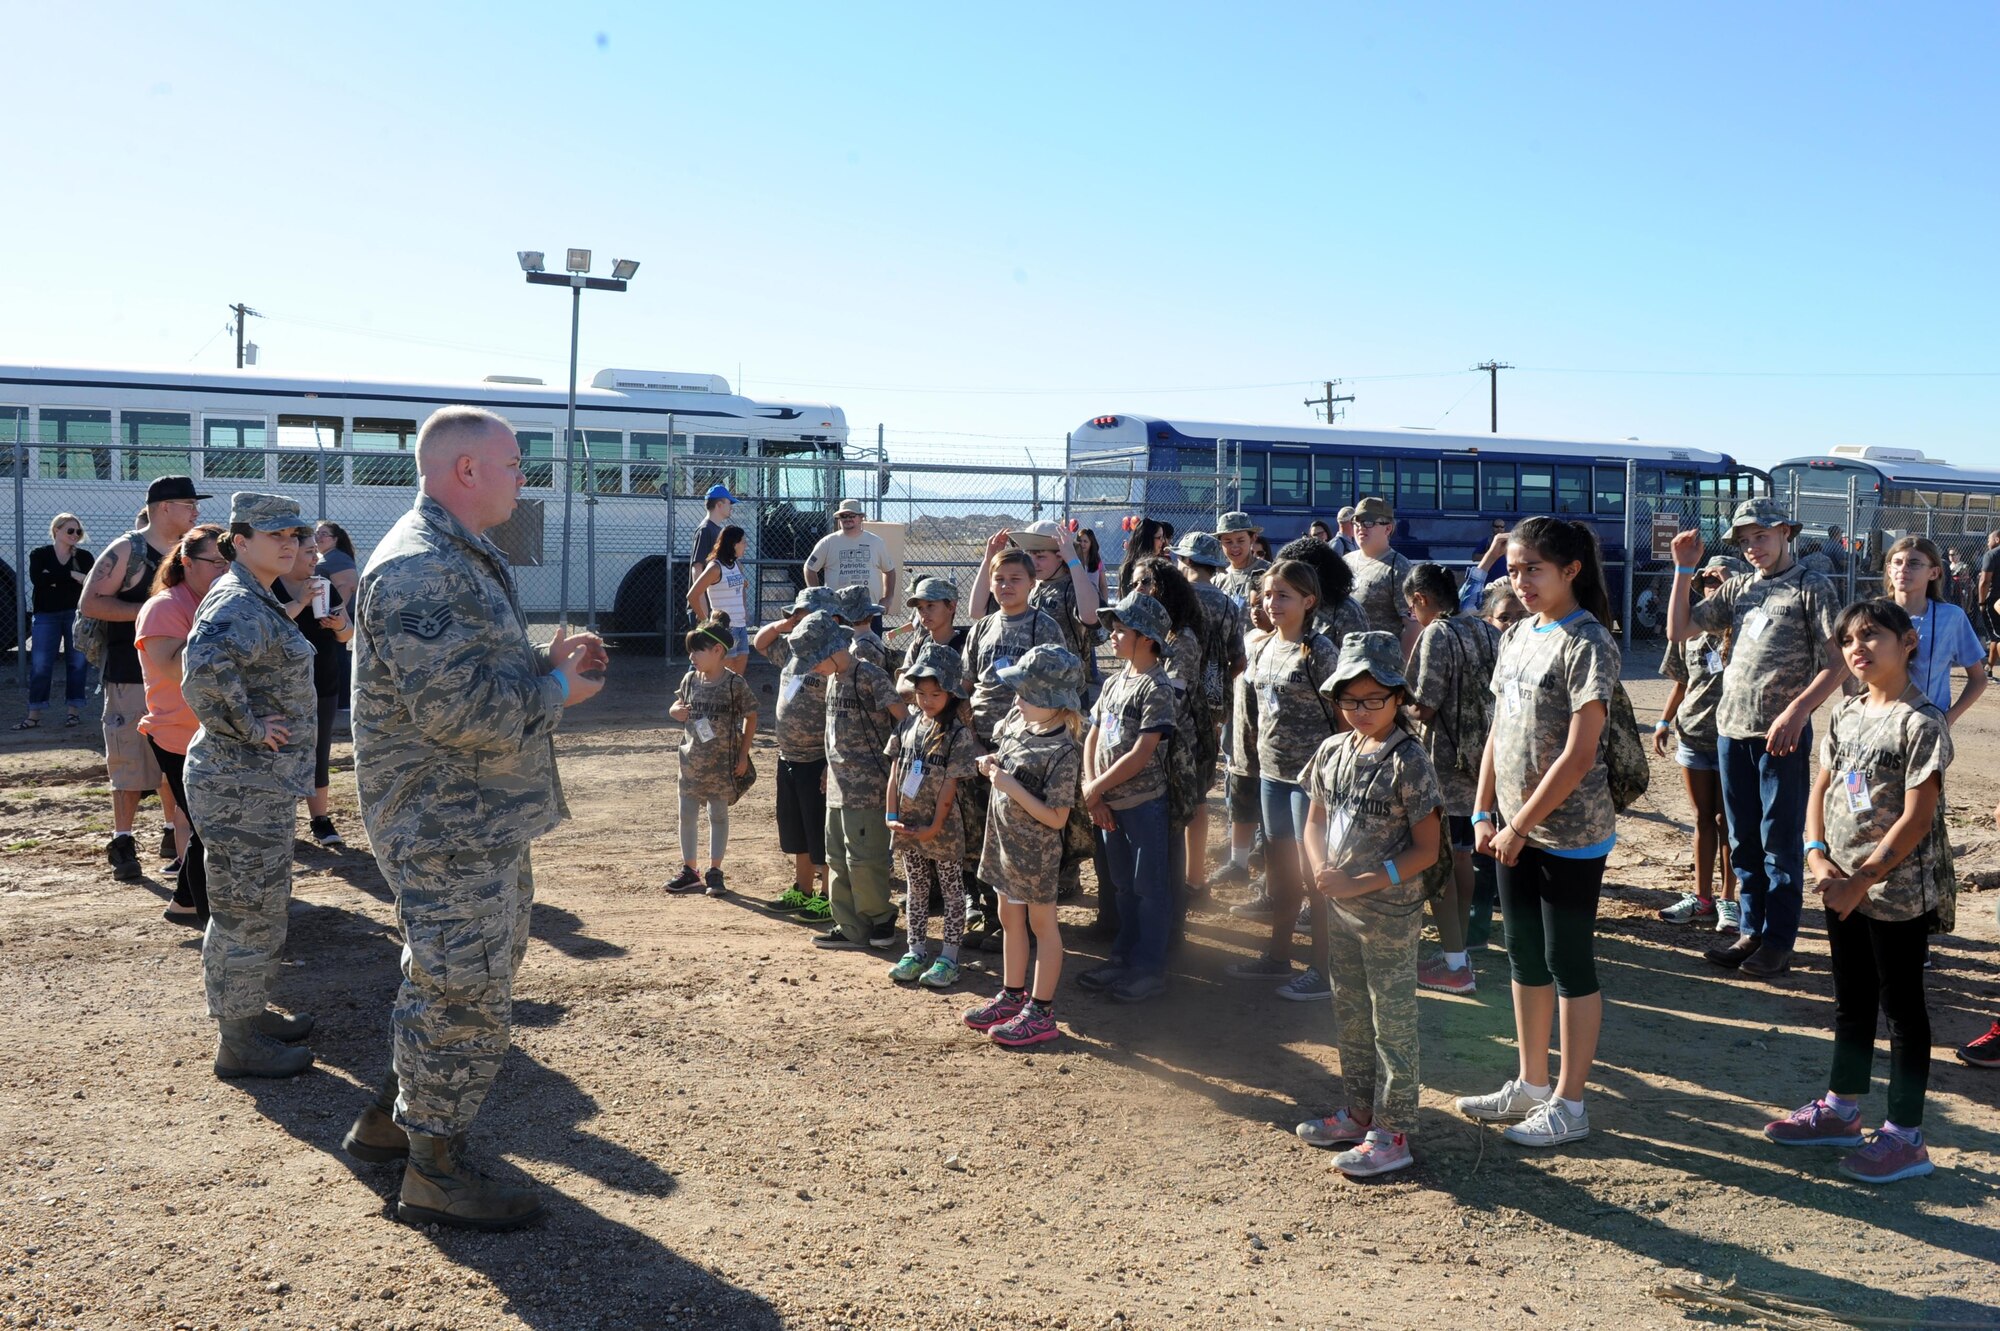 Staff Sgt. James McCoy, 56th Maintenance Group weapons system coordinator and Staff Sgt. Jessica Booth, 56th MXG weapons system coordinator, brief one of the four deployment teams during the Operation Kids event Oct. 15, at Luke Air Force Base, Ariz. After being assigned to teams, participants were transported to the ATSO area for training. (U.S. Air Force Photos by Airman 1st Class Pedro Mota)